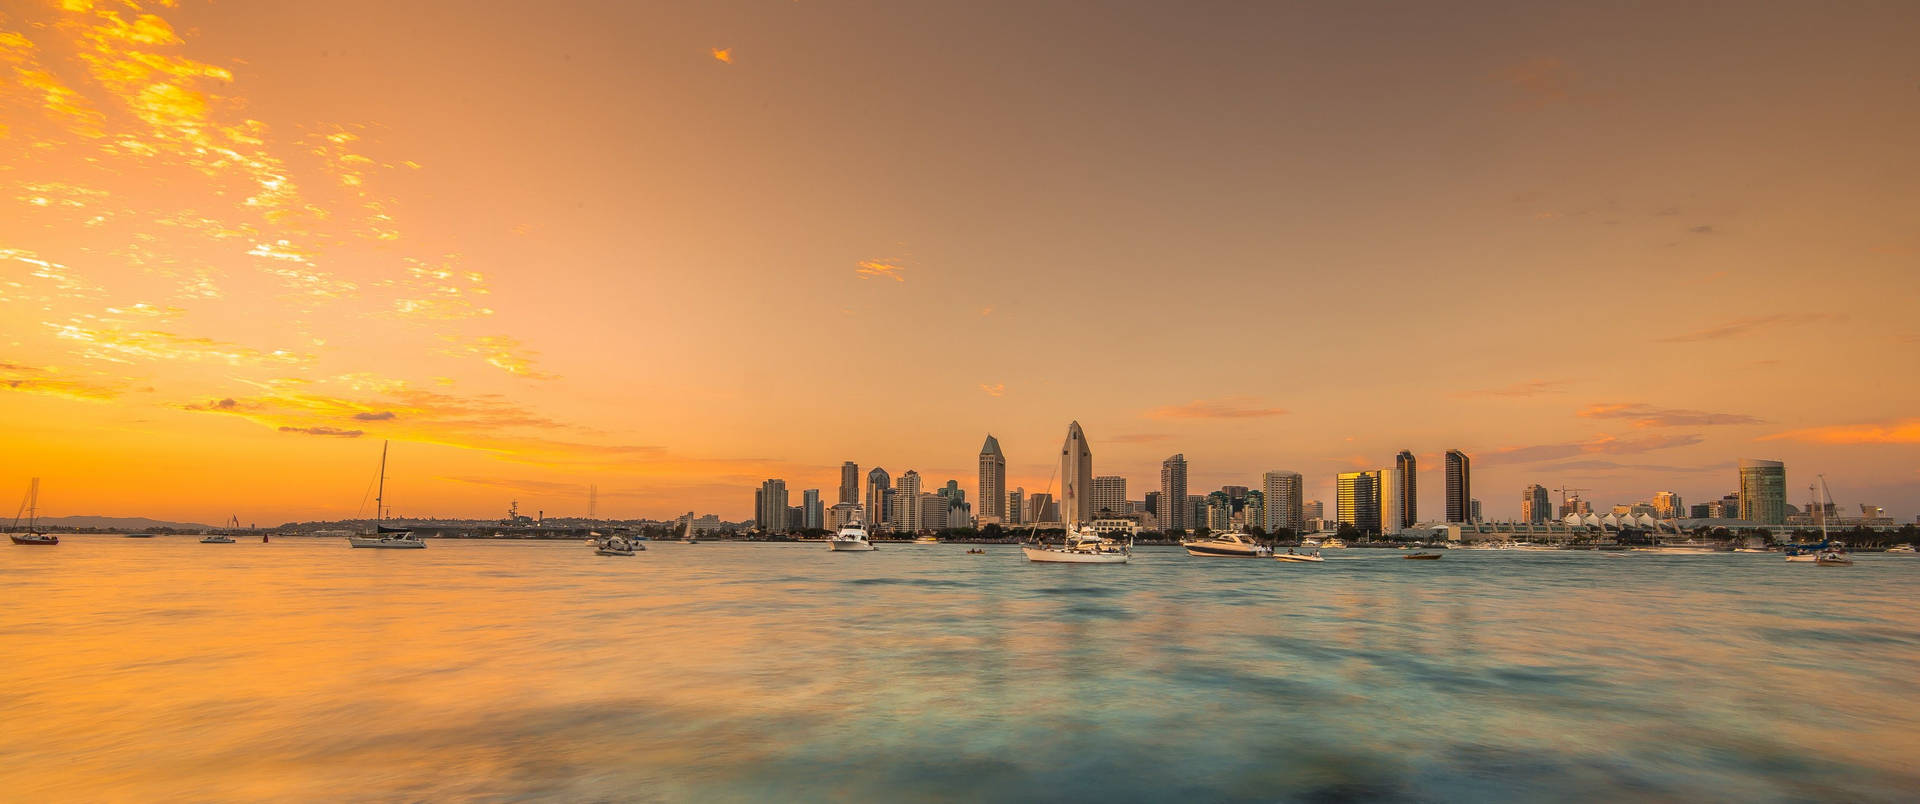 Ultrawide sunset on sea showing tall buildings from afar.